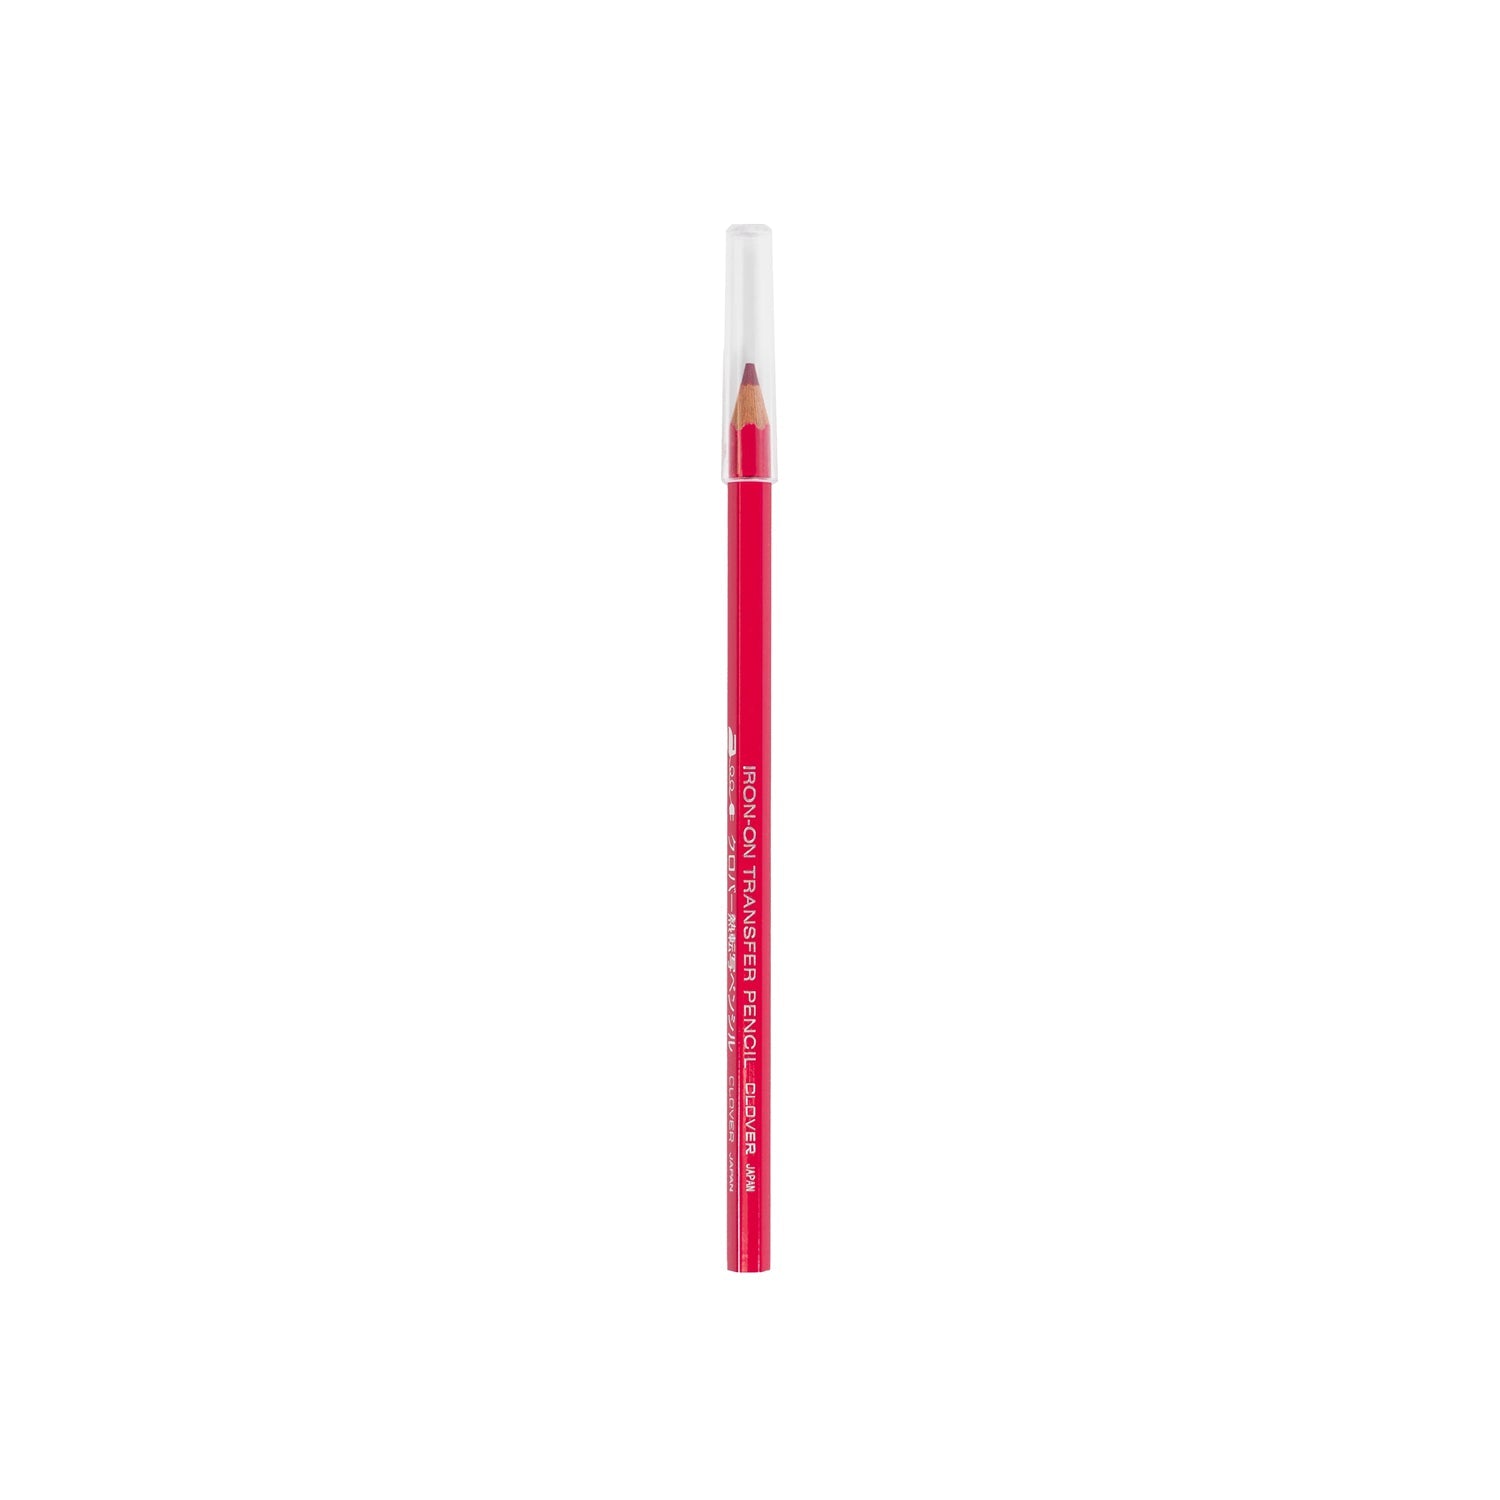 CLV - Iron-On Transfer Pencil (Red)